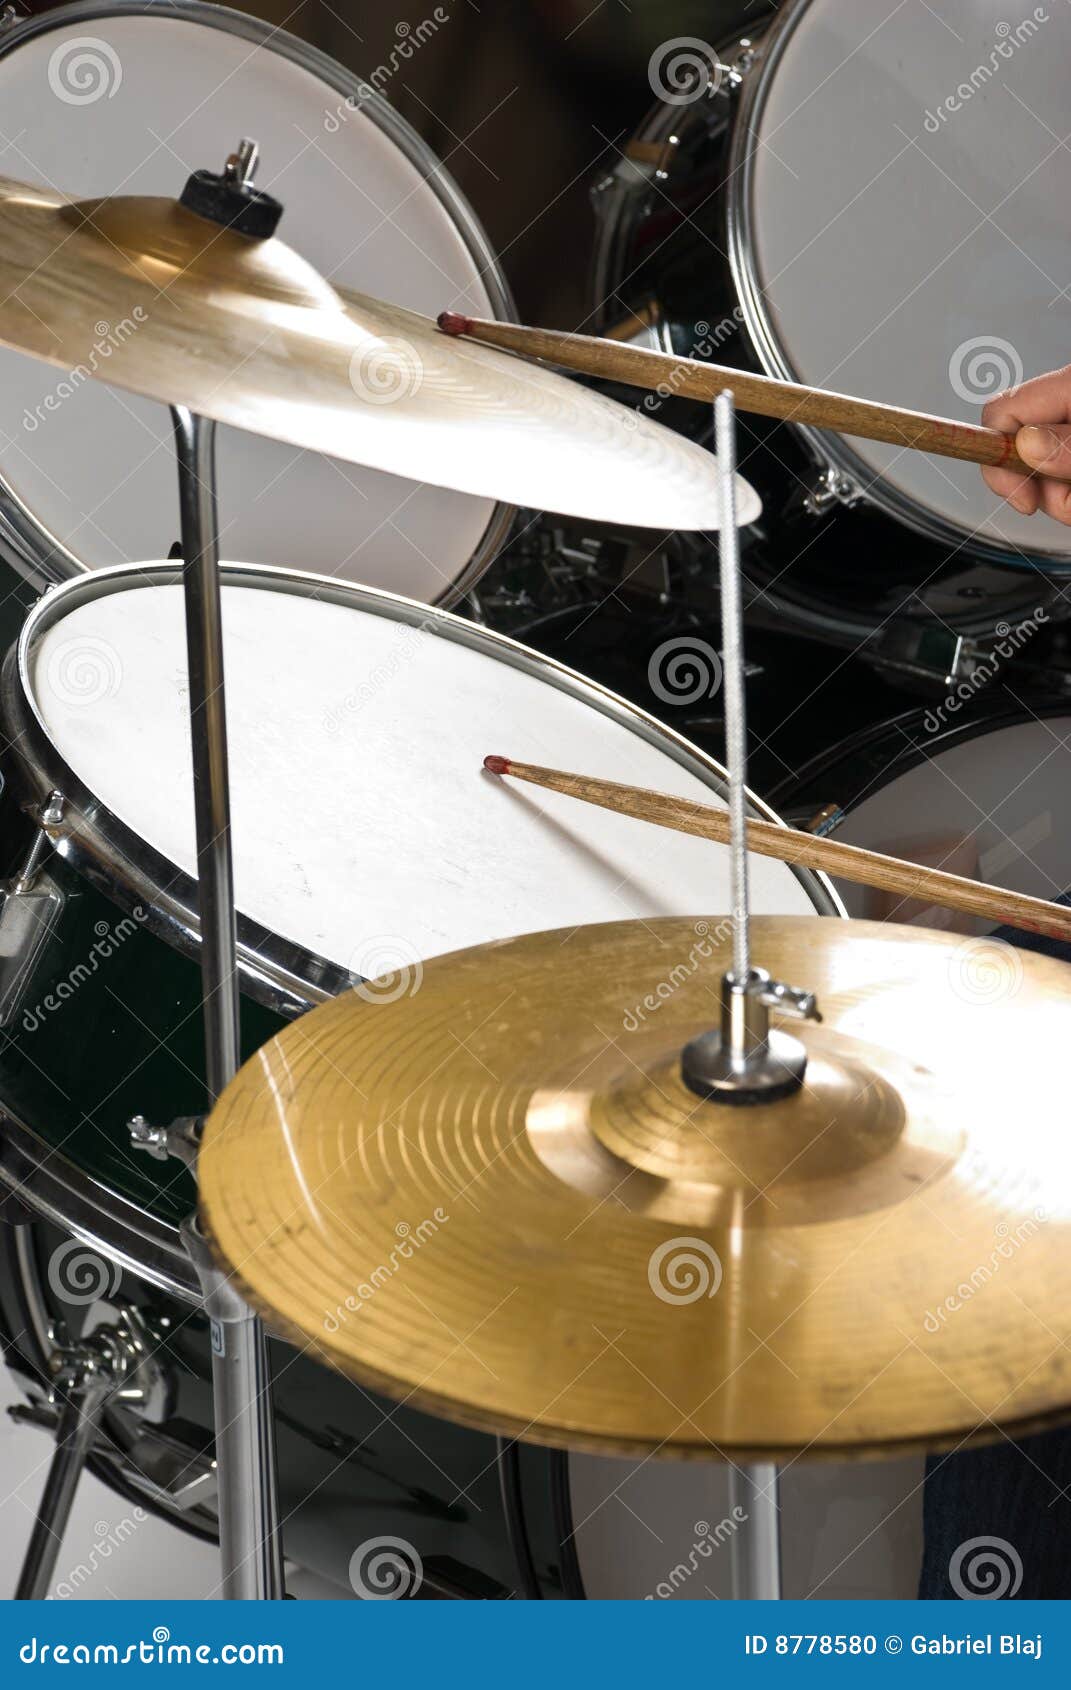 drums and cymbal